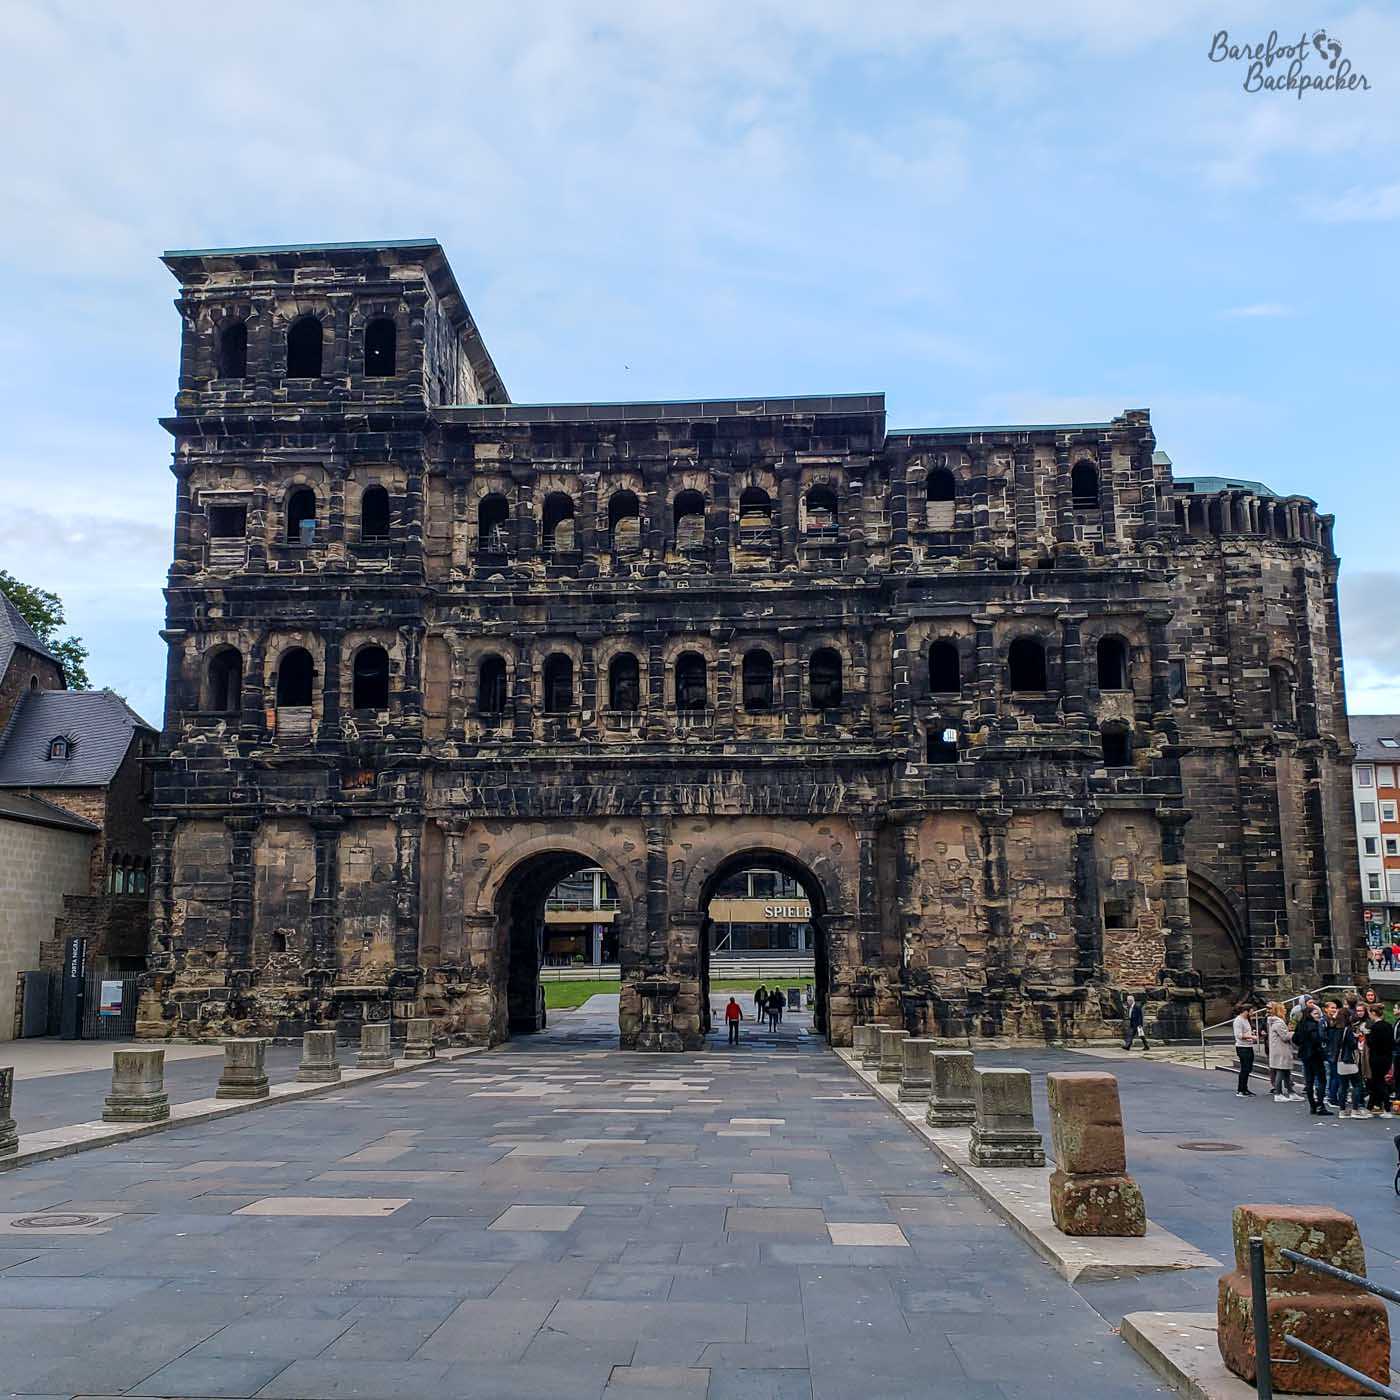 The remains of a large Roman stone gate / portal on the north side of the German city of Trier. It has four layers; at the bottom are two archways where the pedestrianised road passed through. Three bricked-up archways are set on either side. On the next two layers above, there is a horizontal line of small arched windows – 3 on either side and 5 on the main bit above the road. The bits on either side were towers, but the fourth and top layer only still exists on the left side. It has three more small arched windows and a square top. The road is lined on either side with small pillar bases.